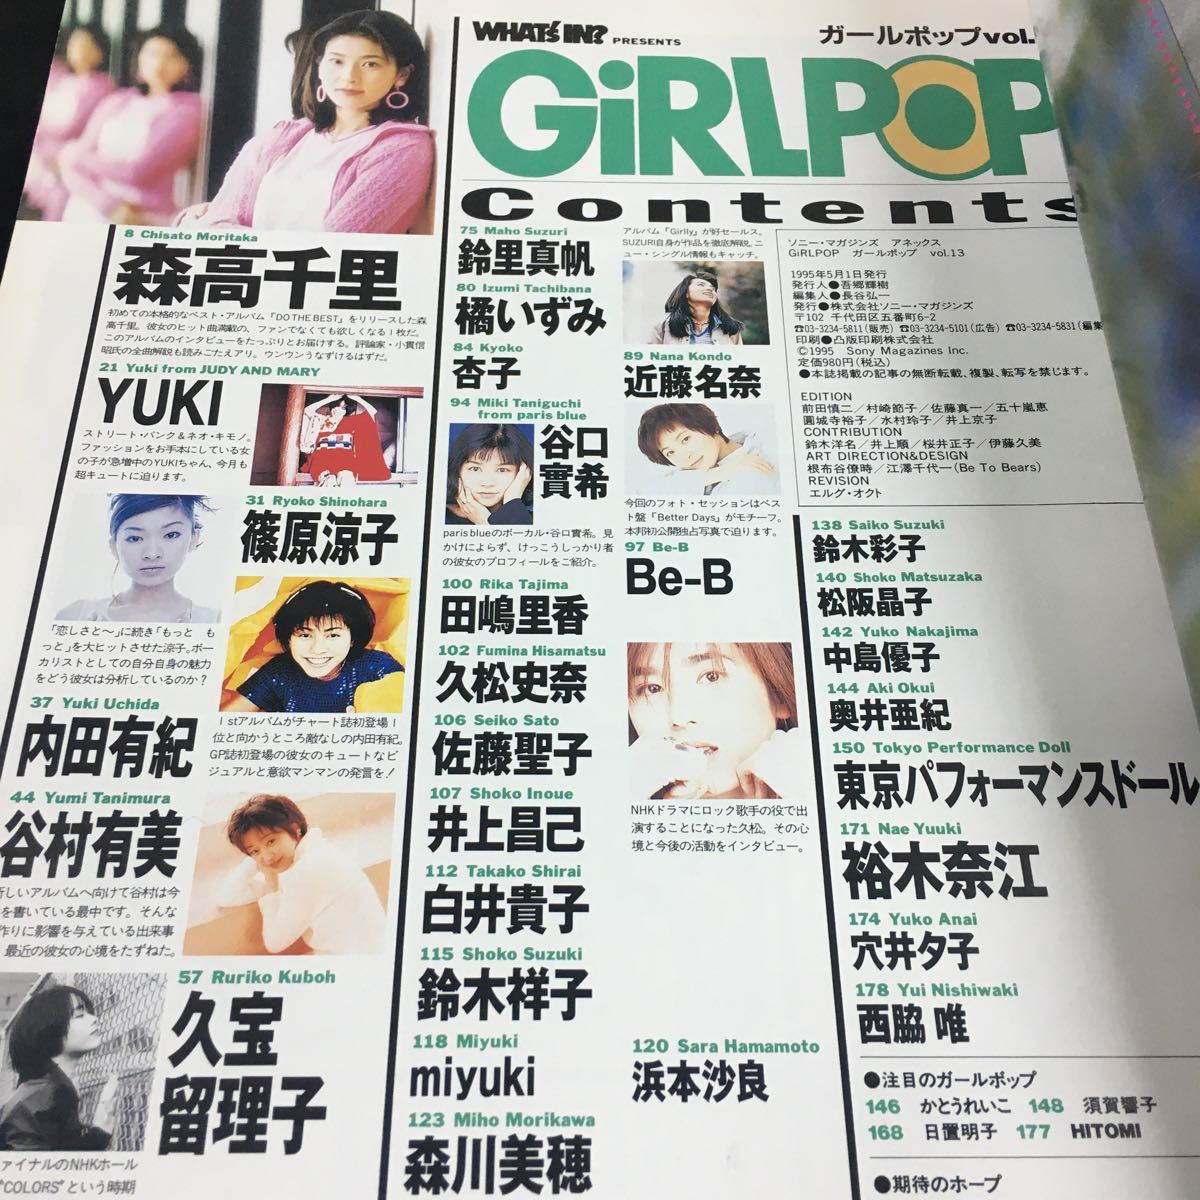 i-034 GiRLPOP( girl pop ) Vol.13 *..3 anniversary commemoration super extra-large number Sony * magazine z other 1995 year 5 month 1 day issue *6